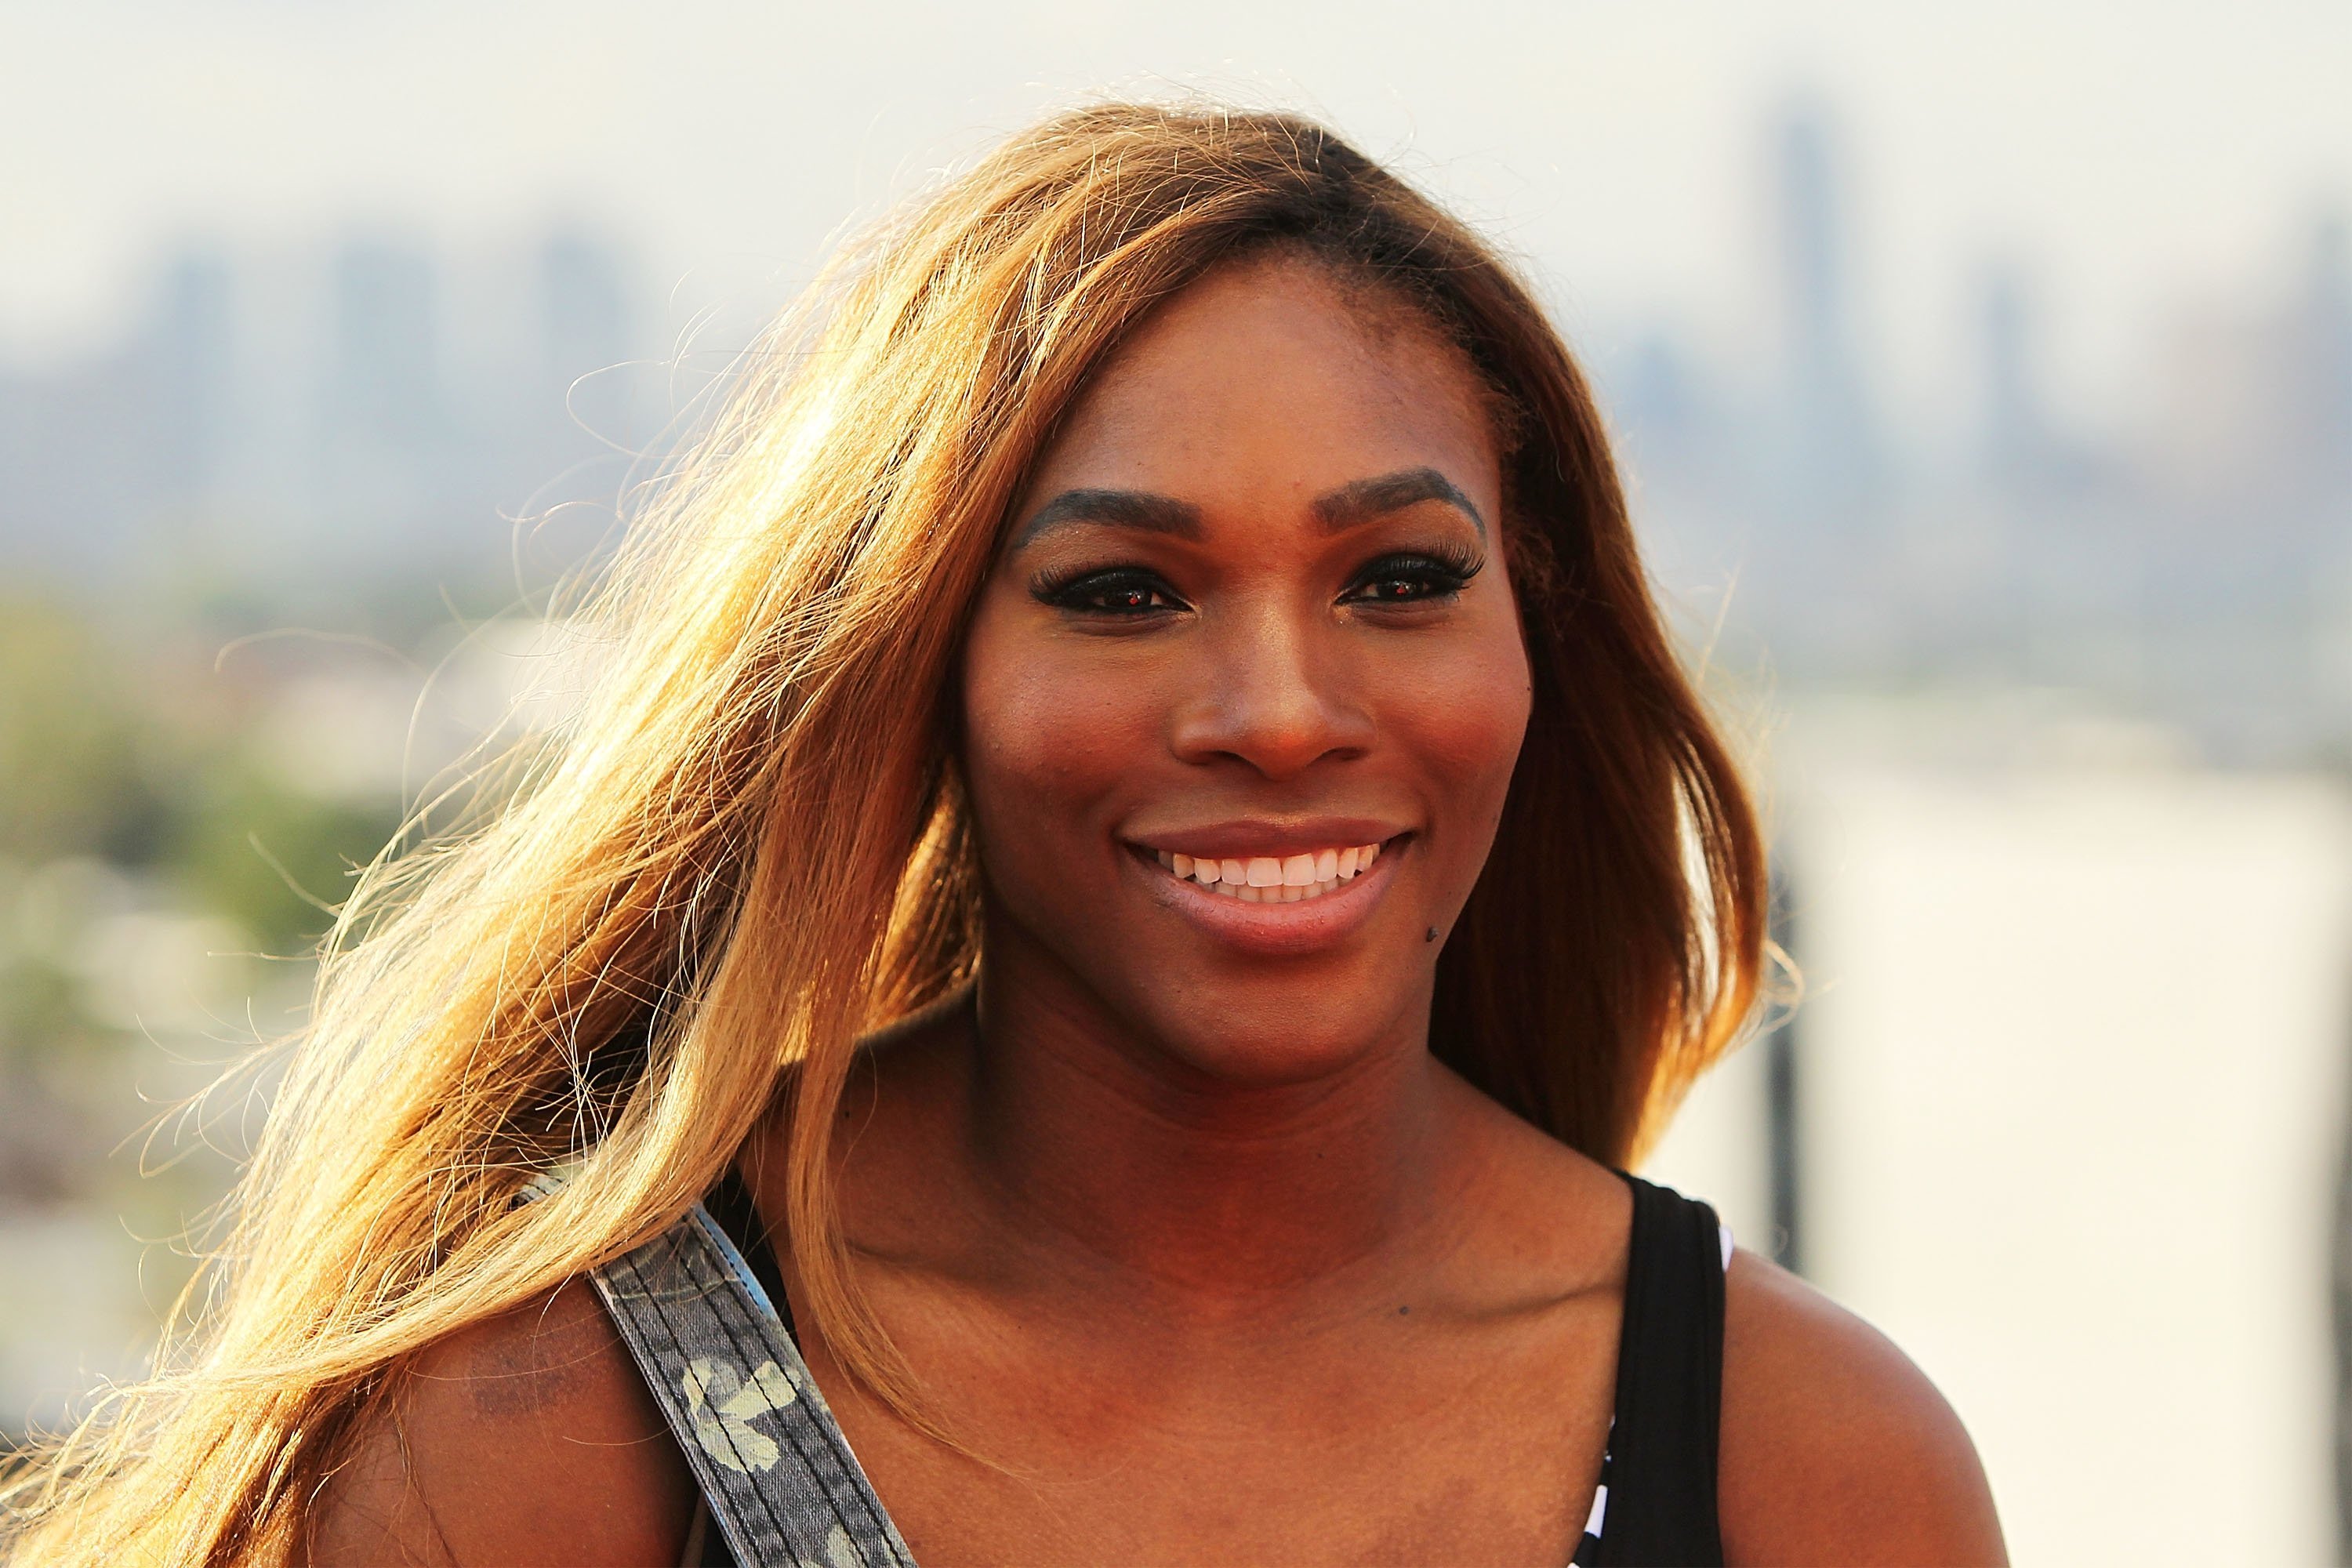 Serena Williams during a meet and greet in Melbourne, Australia in January 2014. | Photo: Getty Images